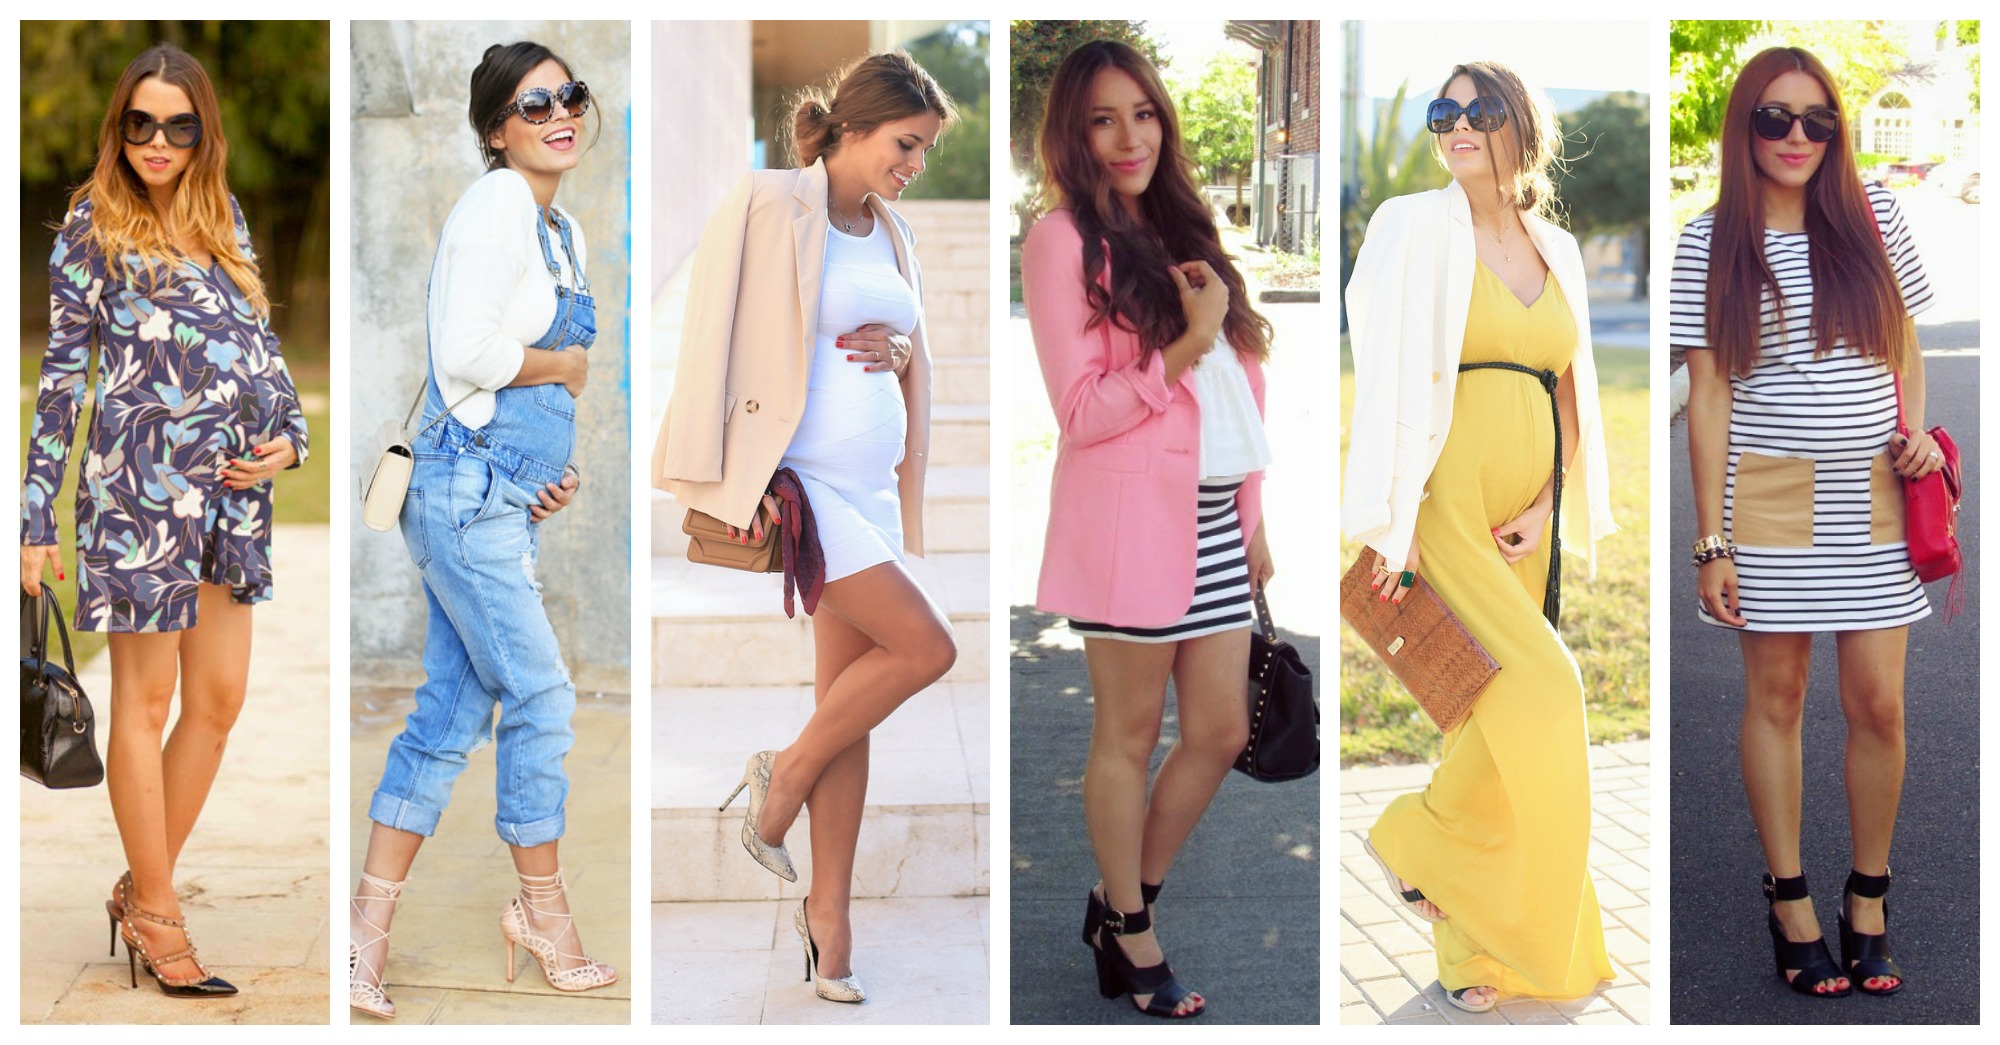 23 Irresistible Maternity Outfits to Stay Chic This Spring